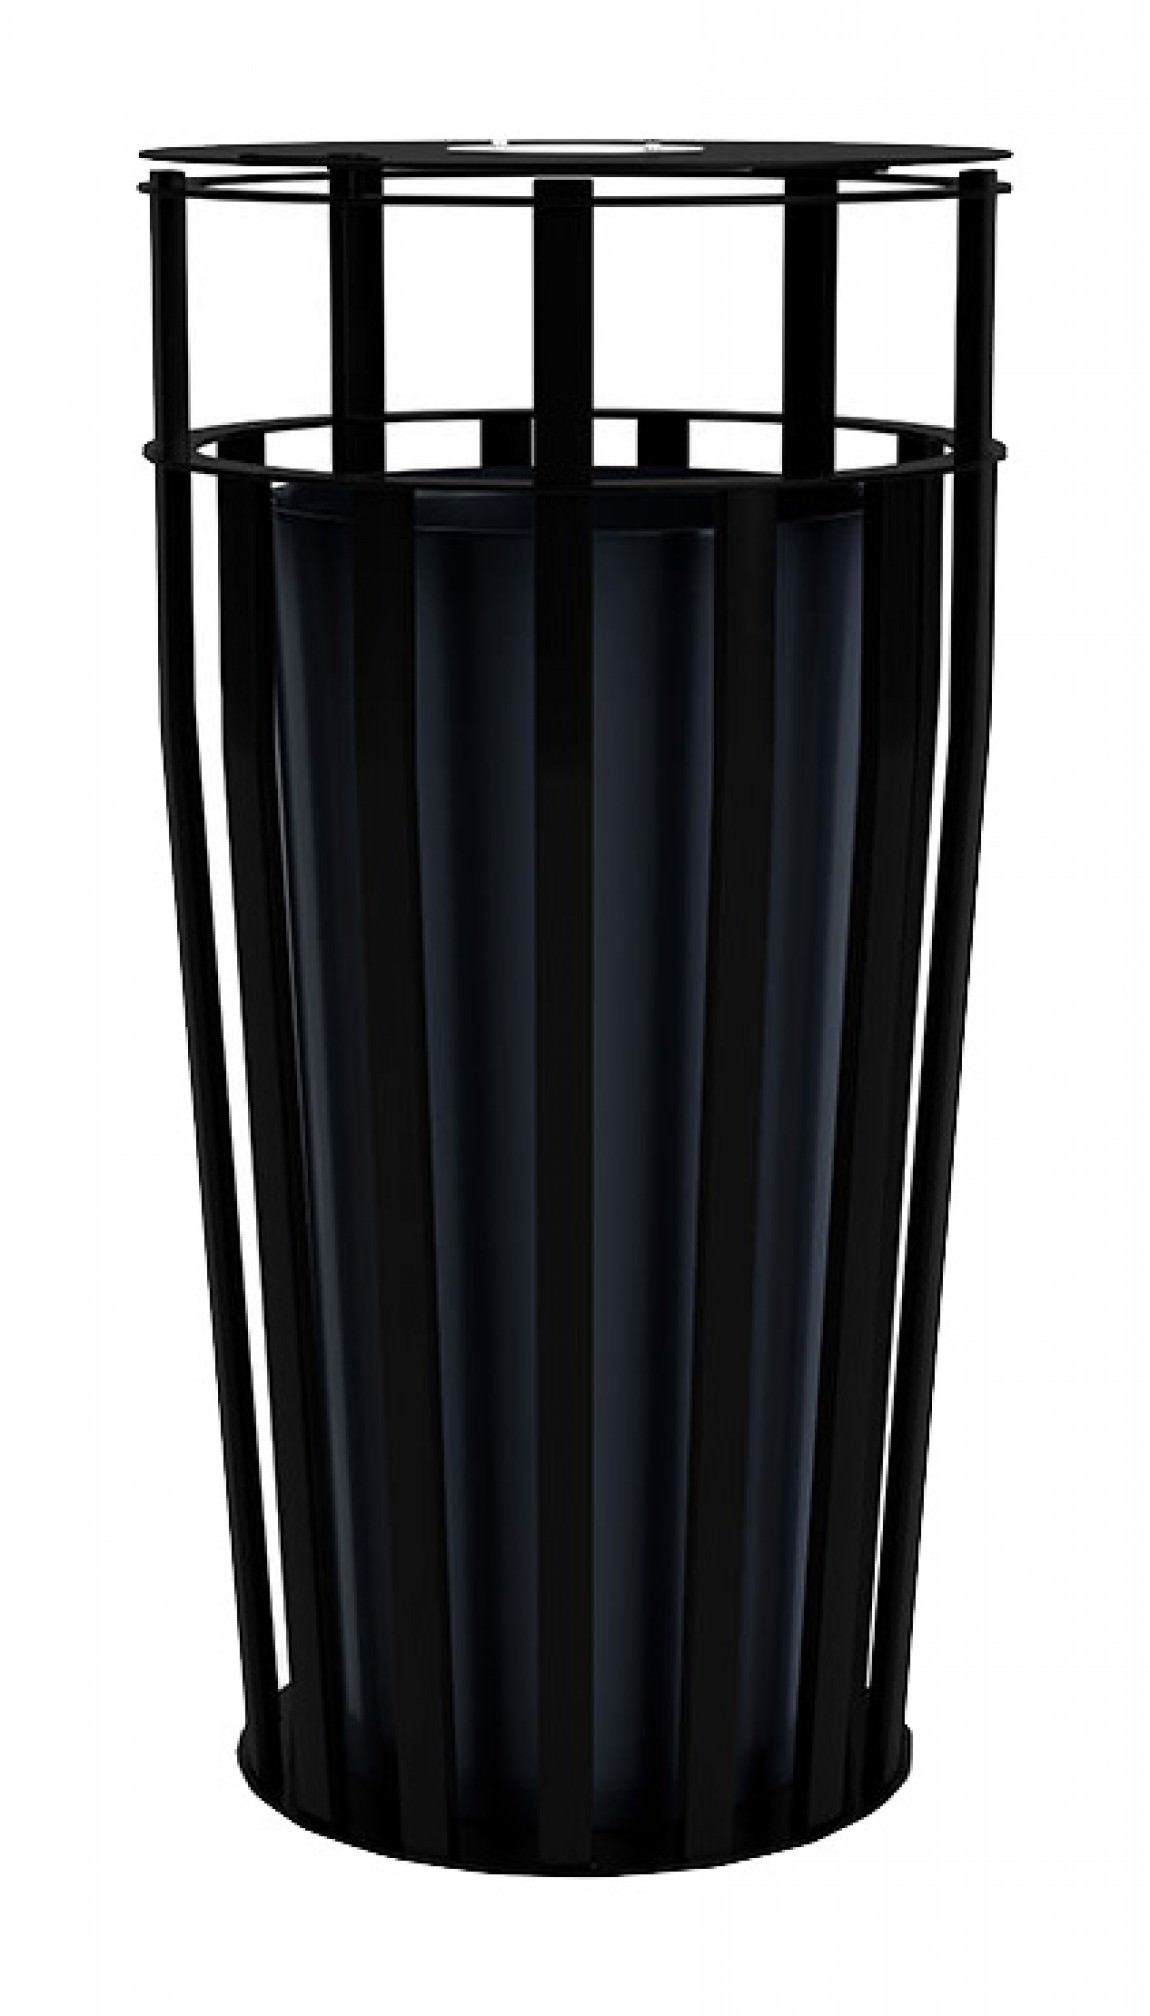 Anthracite Outdoor Garbage Can with Lid 18 x 18 x 31 : D250-DL0